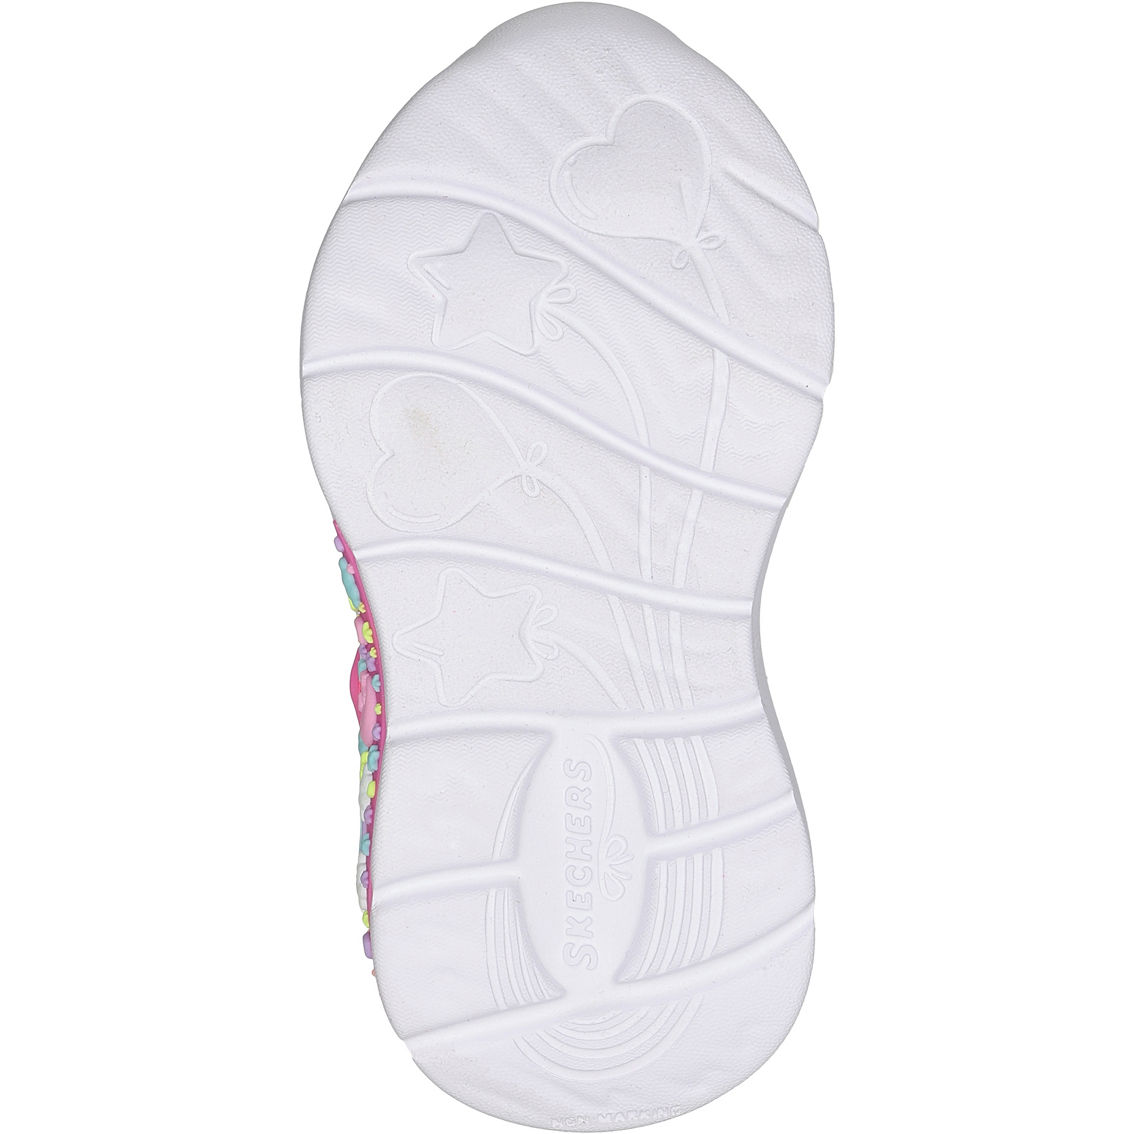 Skechers Toddler Girls My Dreamers Shoes - Image 6 of 6